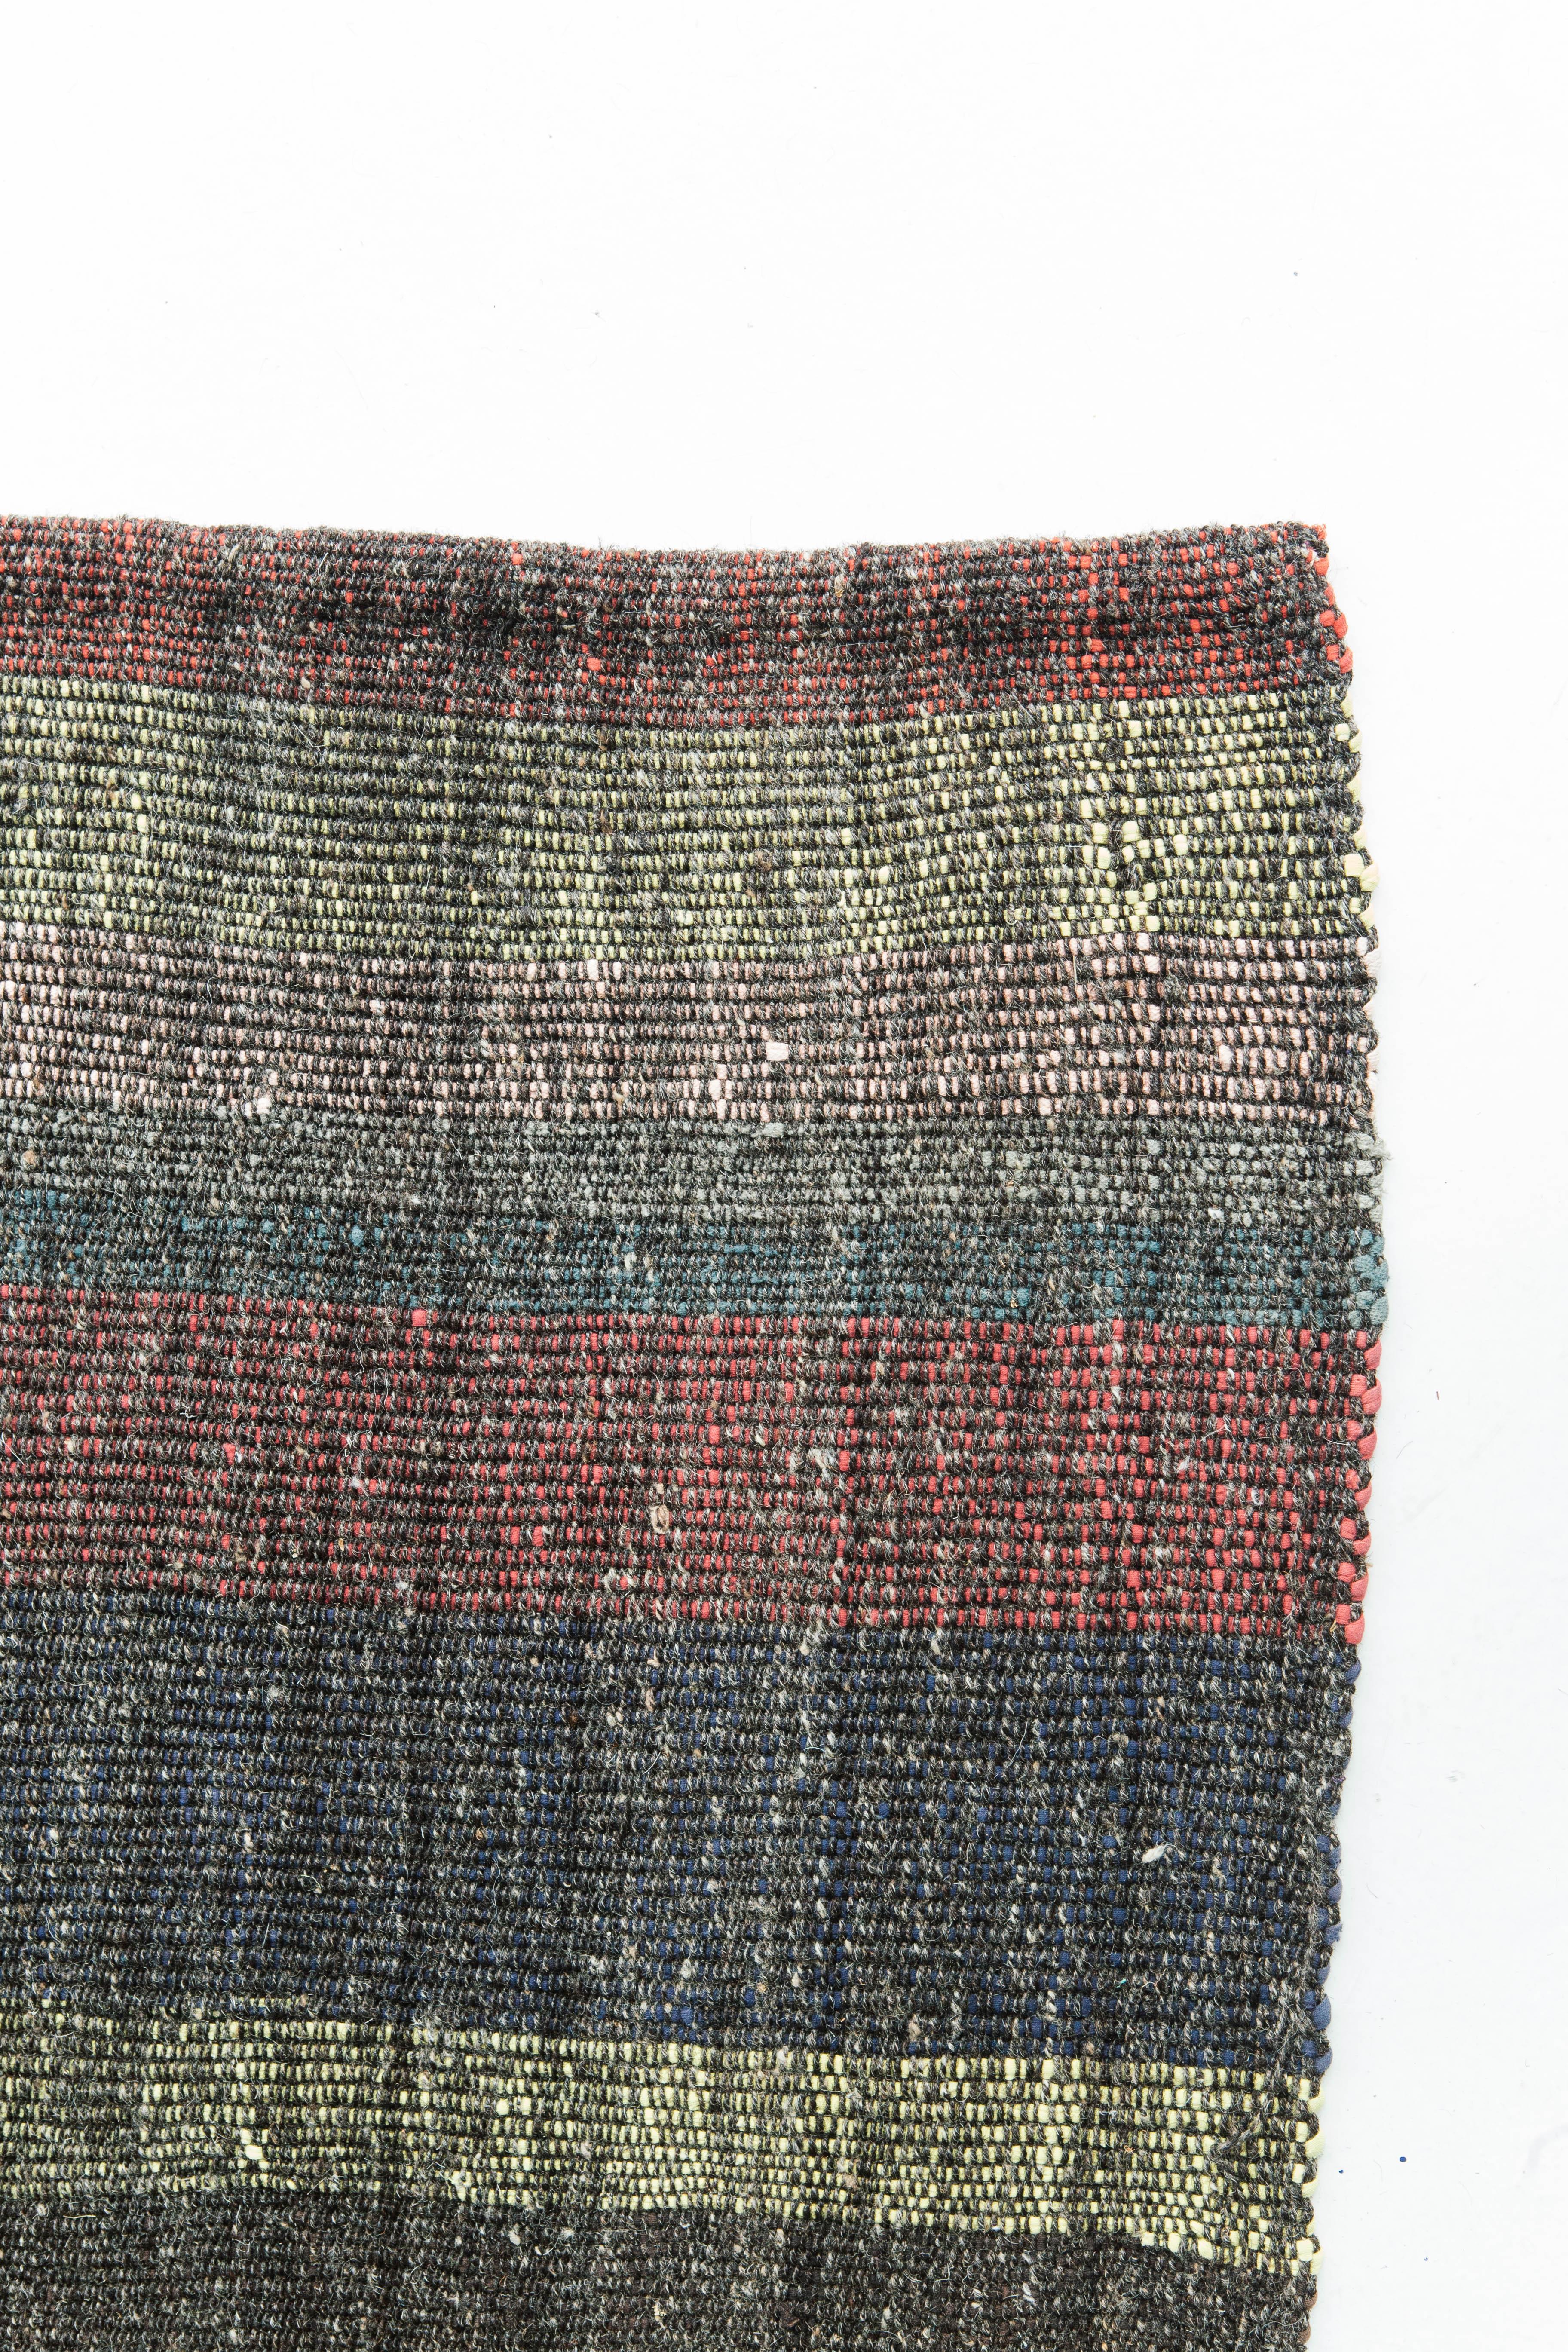 This Turkish Tisse Kilim weaves together beautiful colors to create an abstract plaid pattern. The various colors create a warm and cohesive look in an interesting texture. This flat-weave would be a great addition to elevate any design